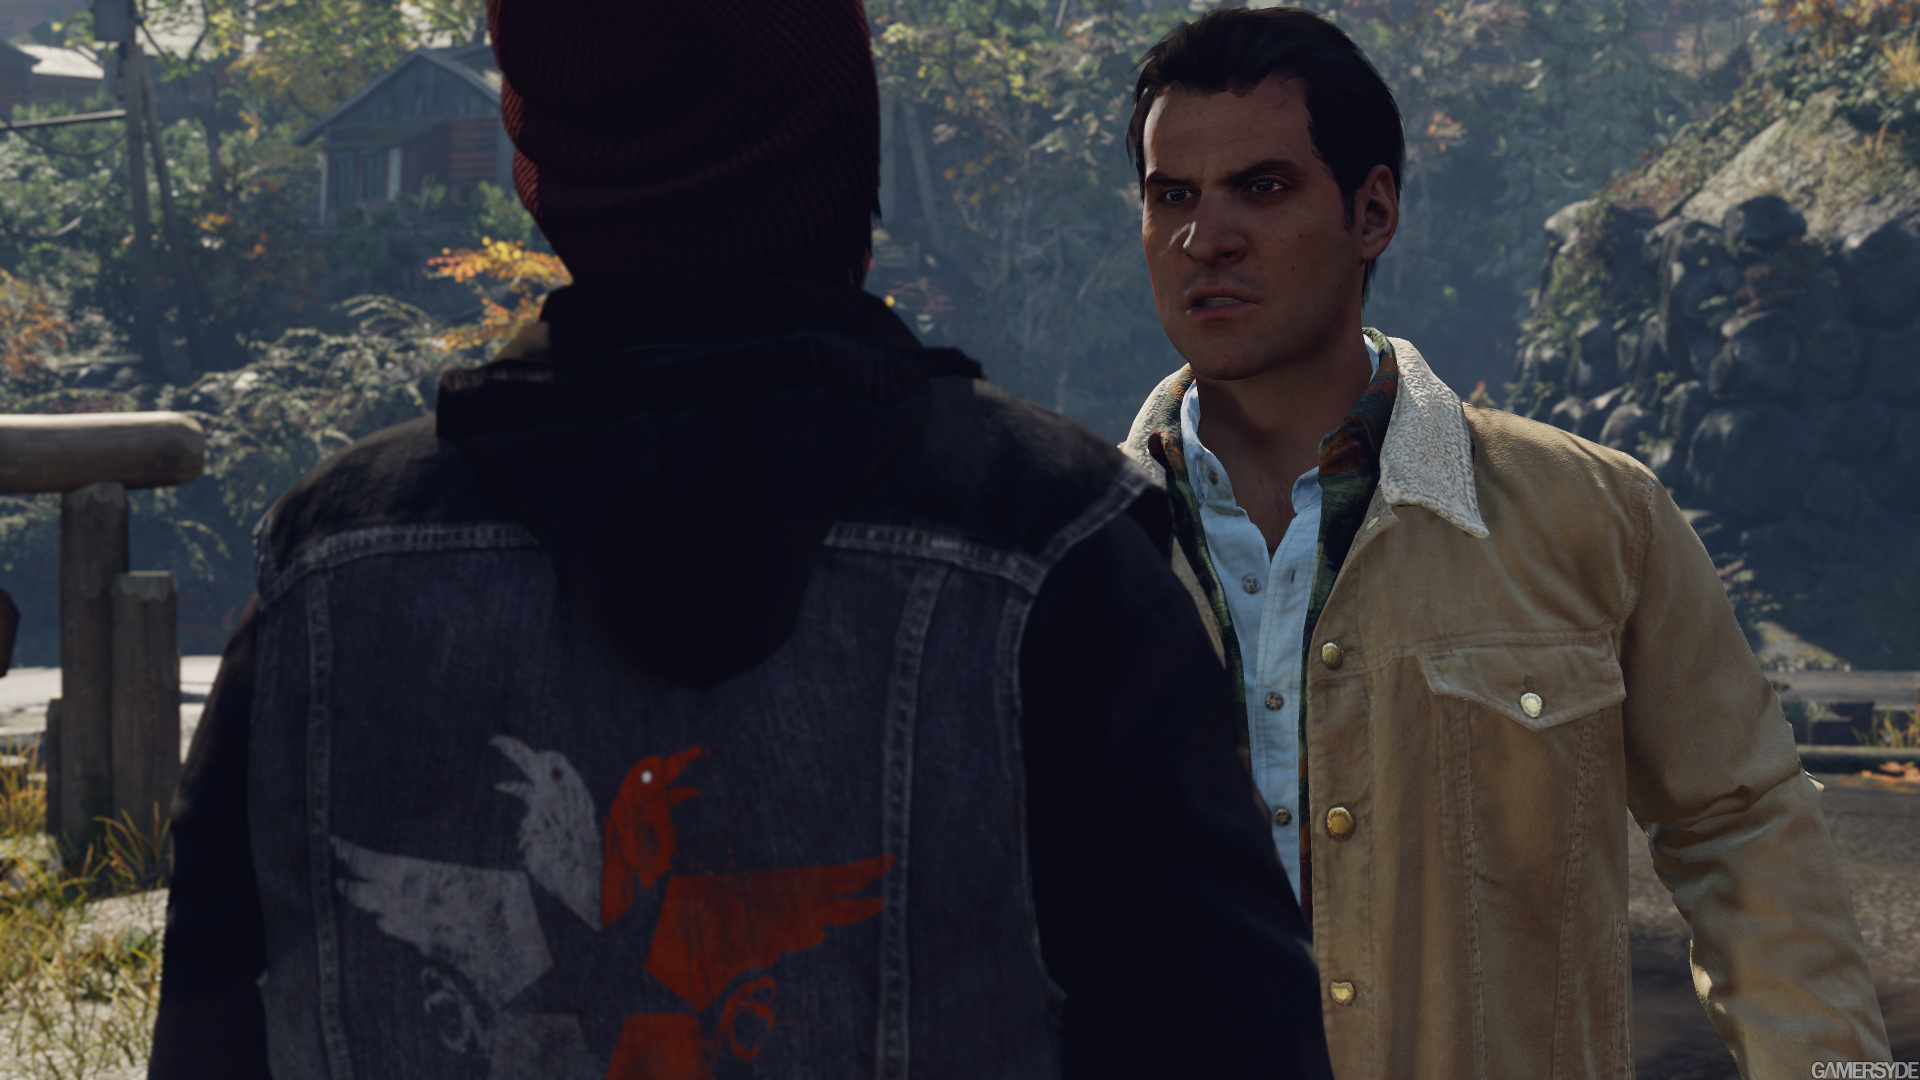 Infamous Second Son New Screens Gamersyde